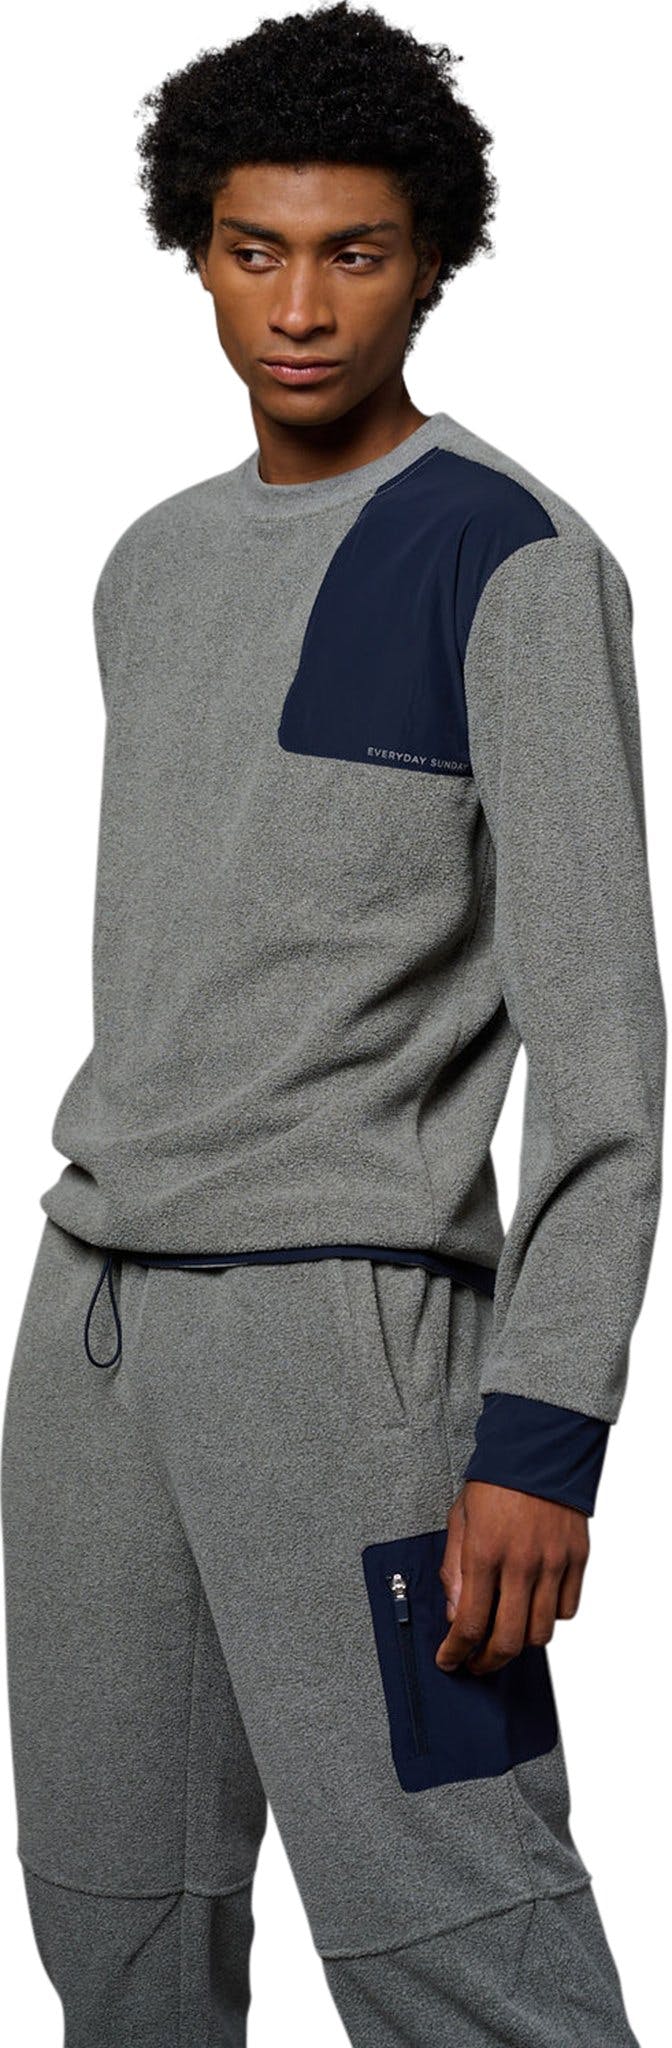 Product image for The Cozy Polar Pullover - Men's